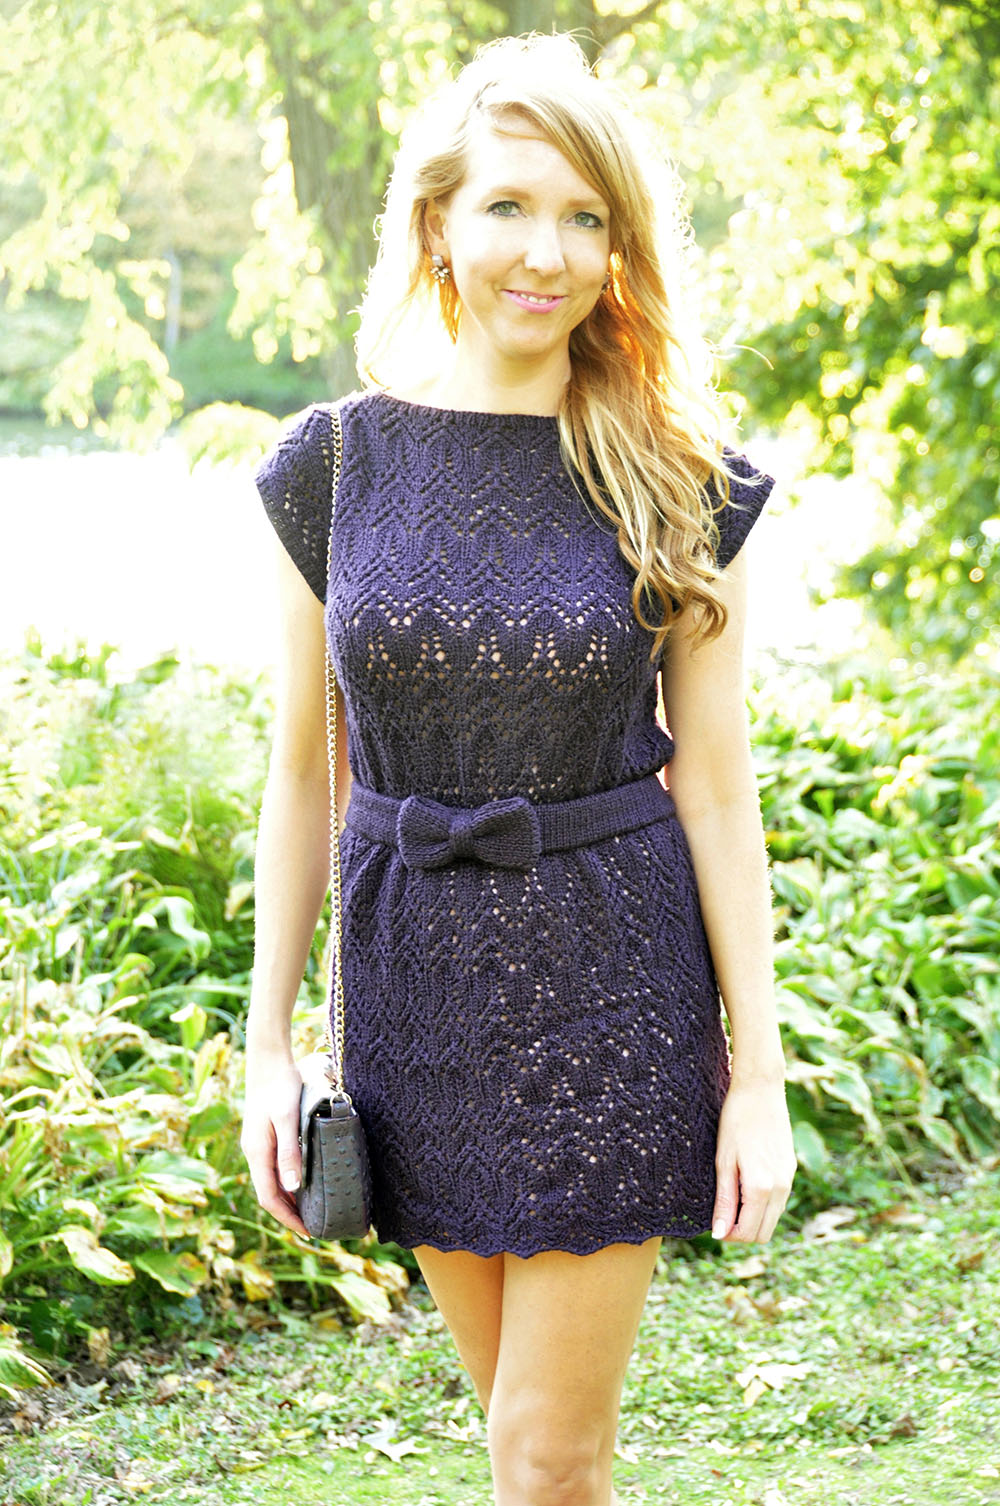 “Take a Bow” Lace Dress and Top